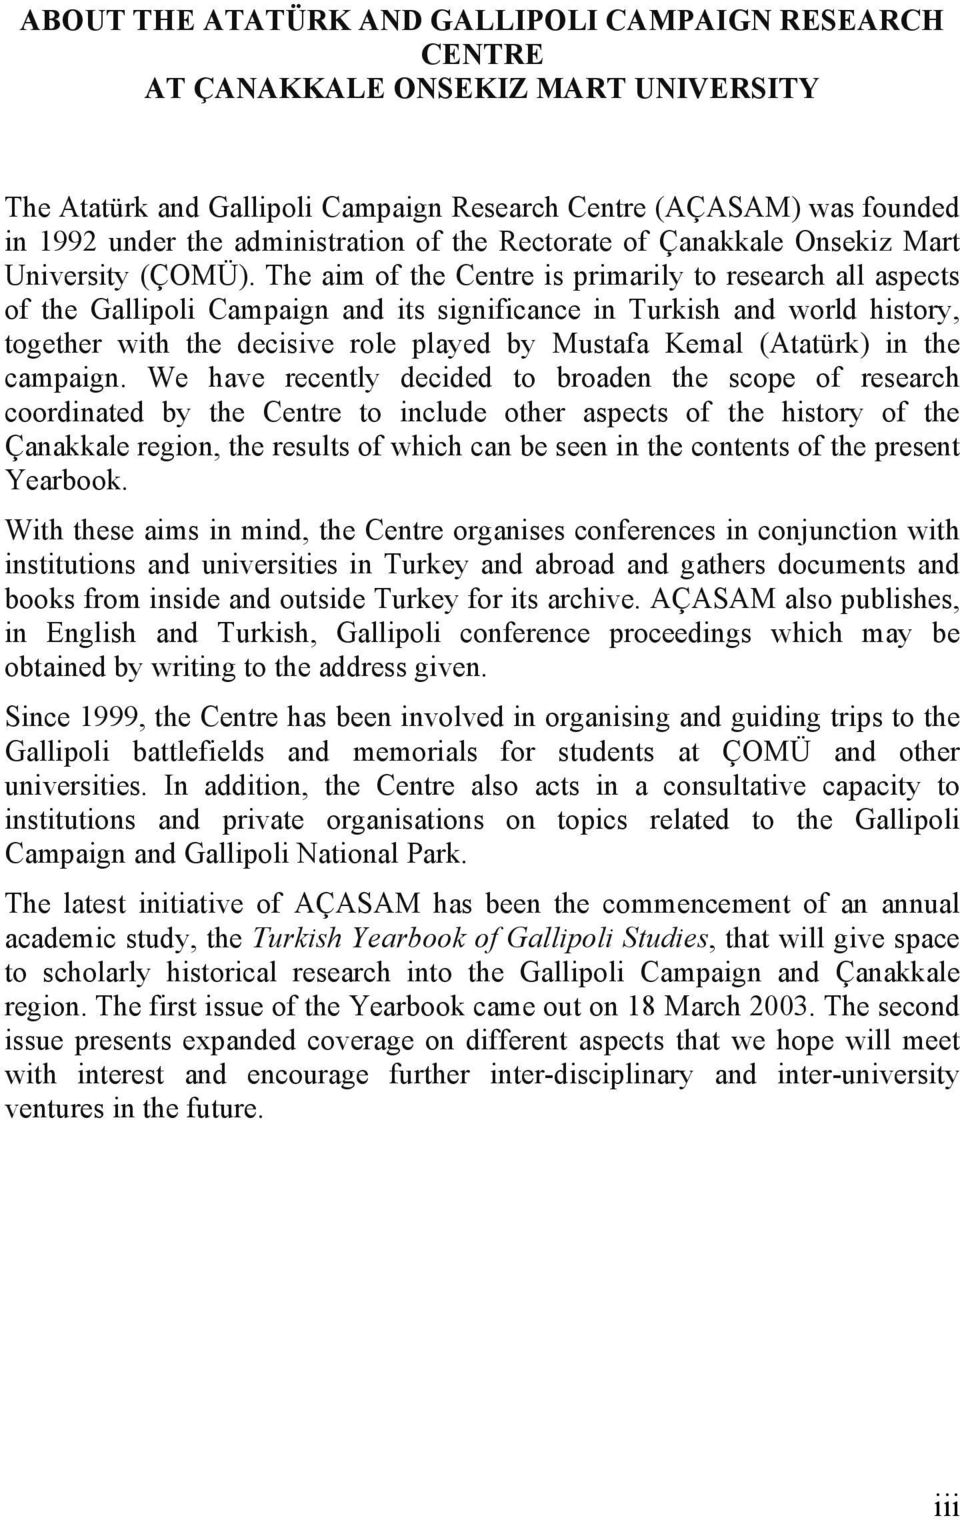 The aim of the Centre is primarily to research all aspects of the Gallipoli Campaign and its significance in Turkish and world history, together with the decisive role played by Mustafa Kemal